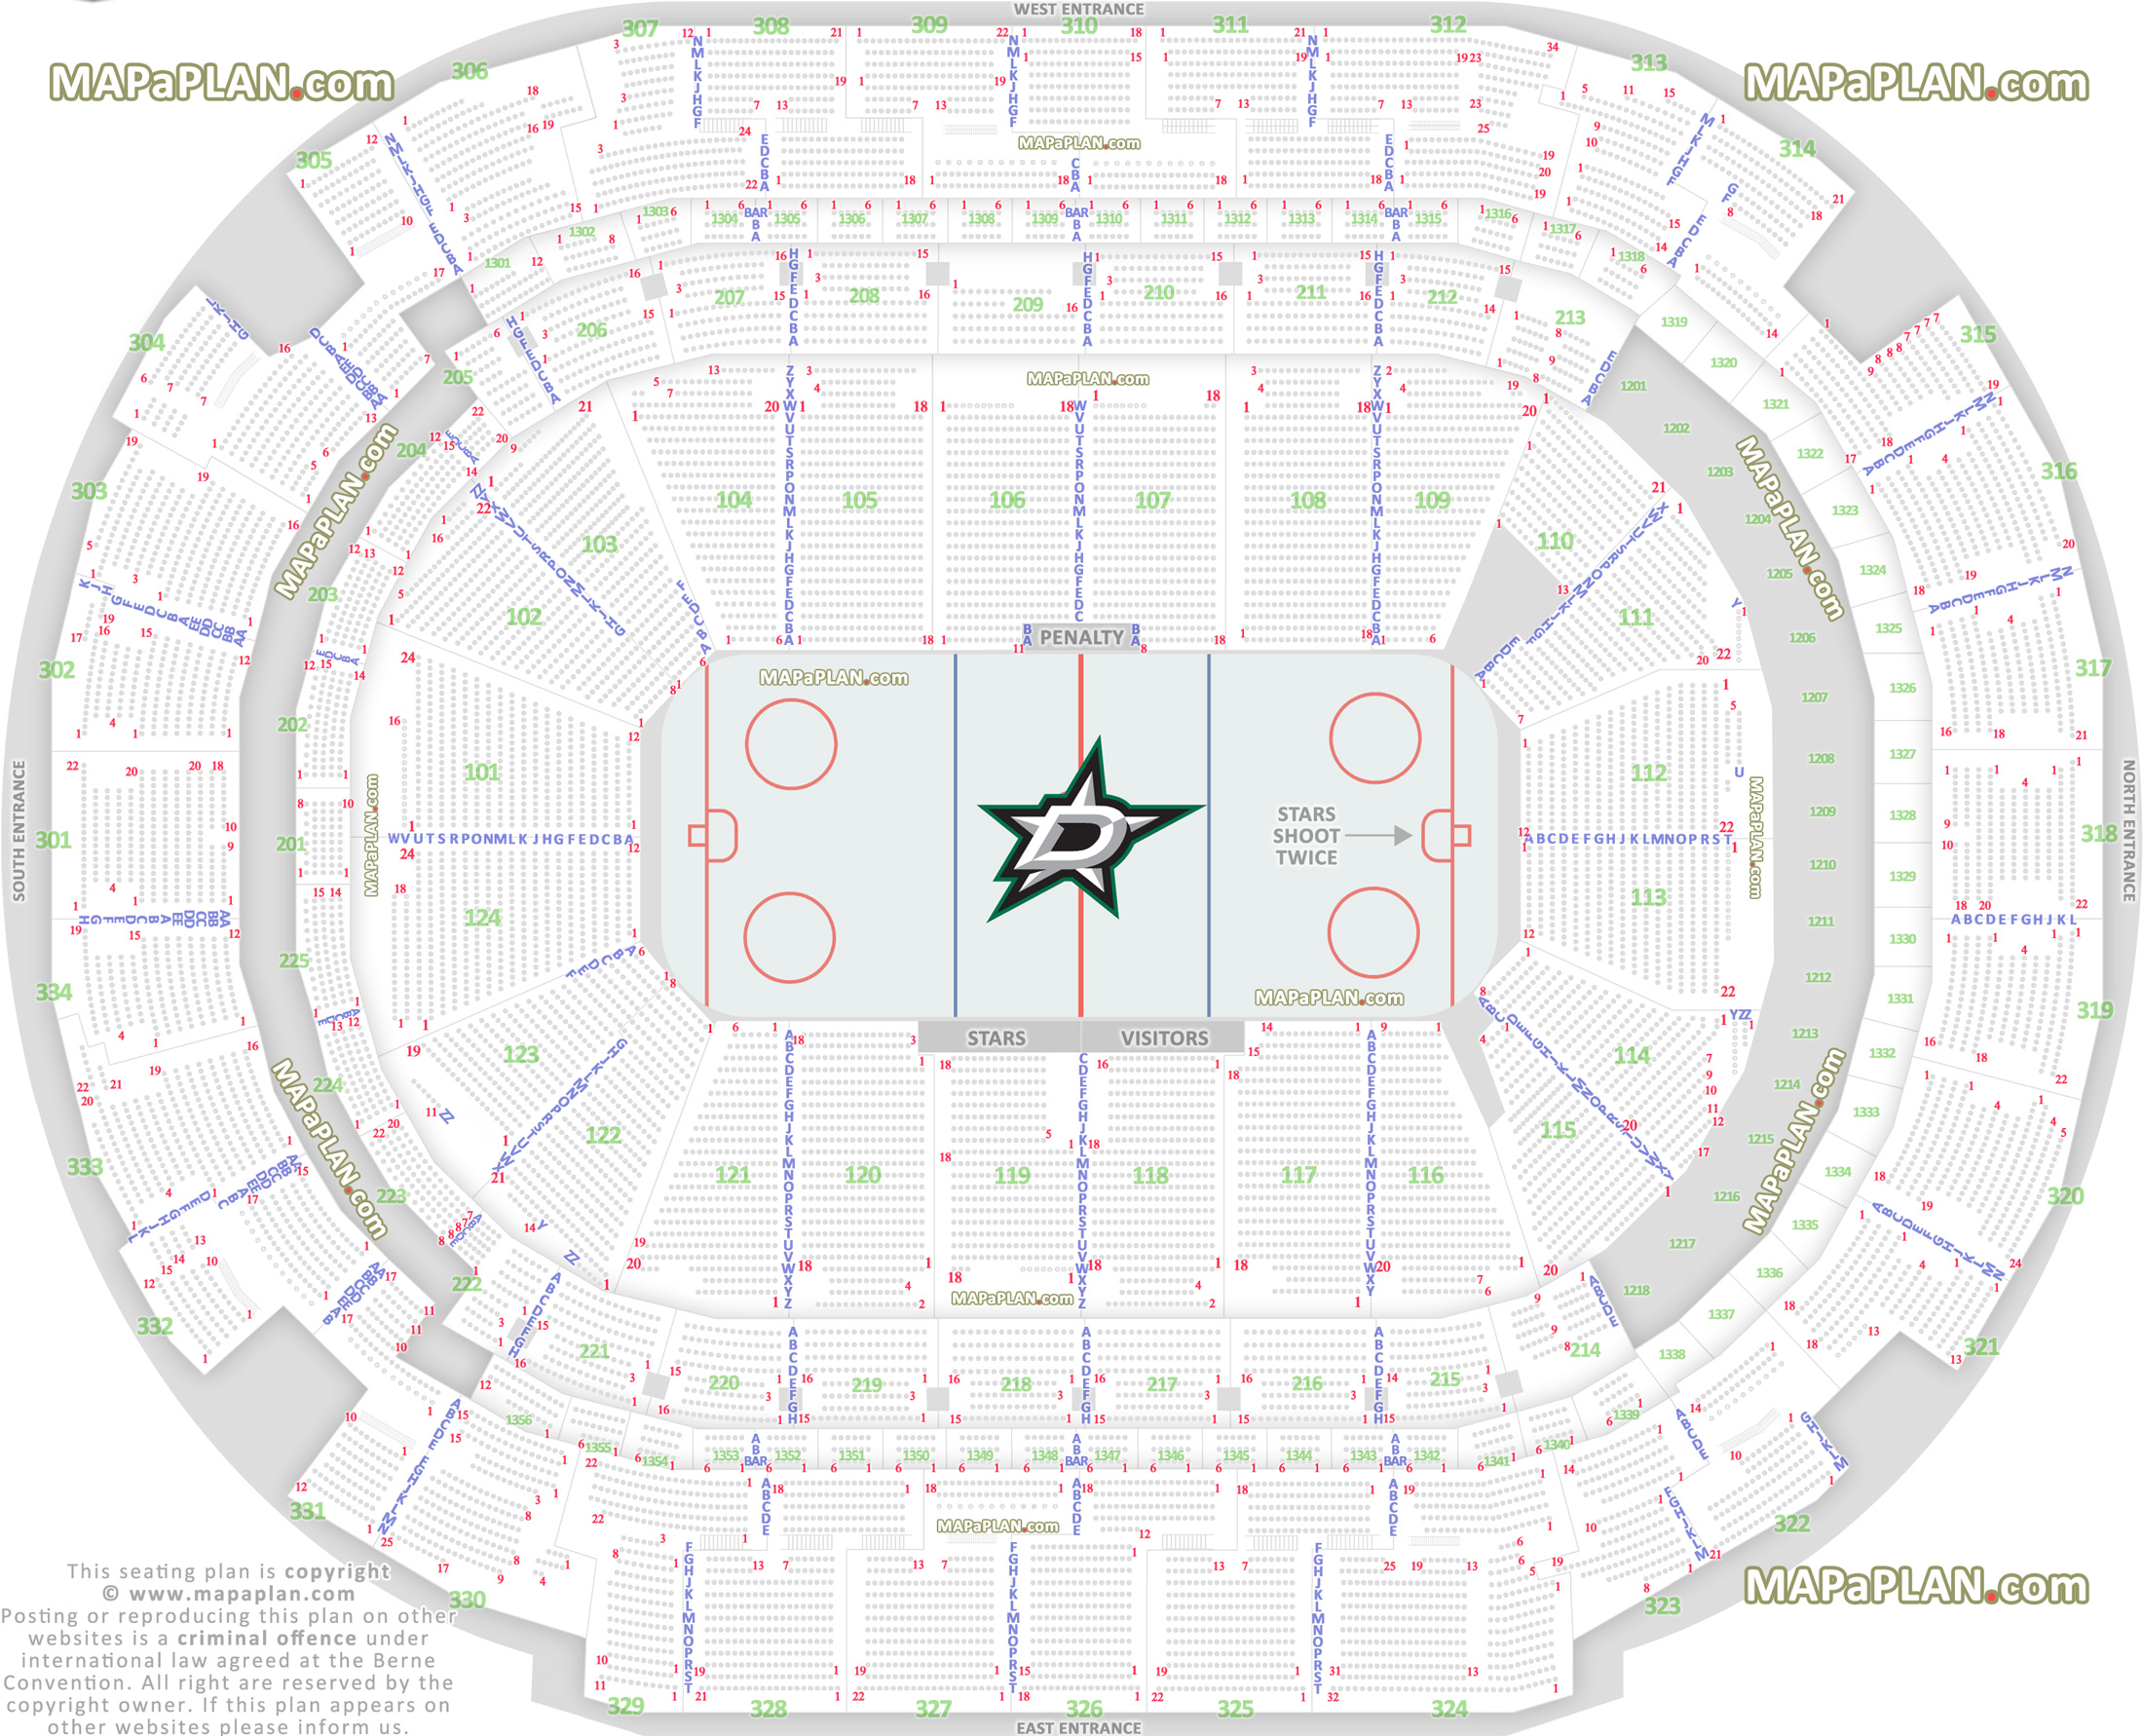 dallas stars tx nhl ice hockey game rink exact aac venue map with bar club premium seats Dallas American Airlines Center seating chart